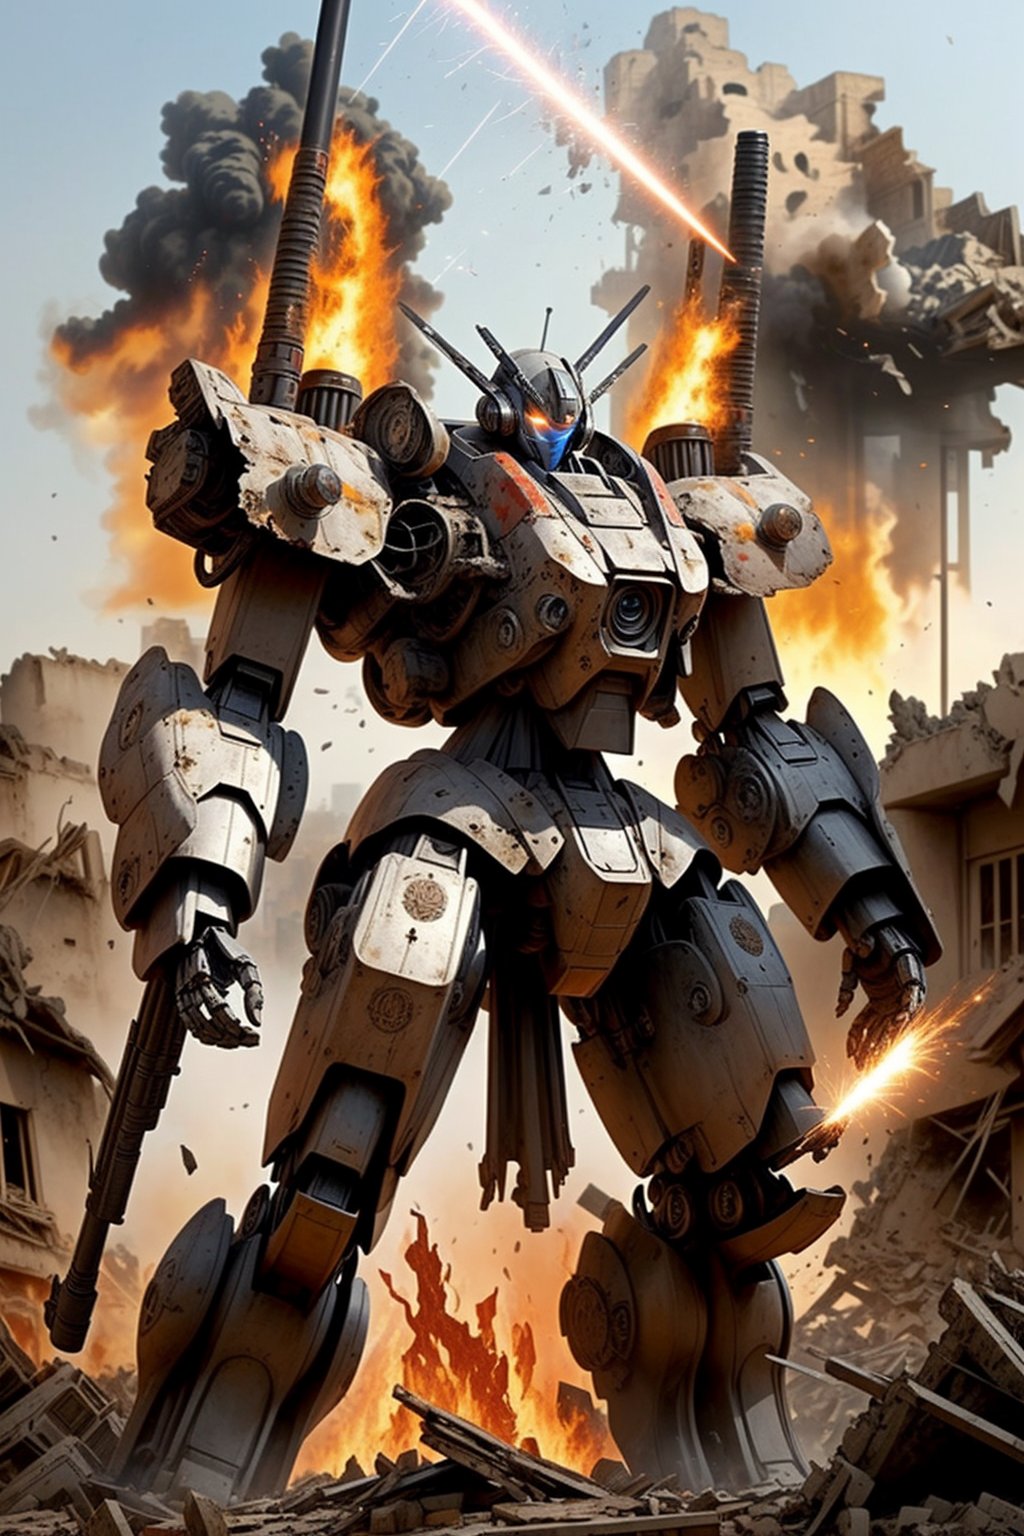 masterpiece, best quality,  Indian mecha, in front of a Indian Temple, no humans, black armor, blue eyes, science fiction, fire, laser canon beam, war, conflict, destroyed city background, 